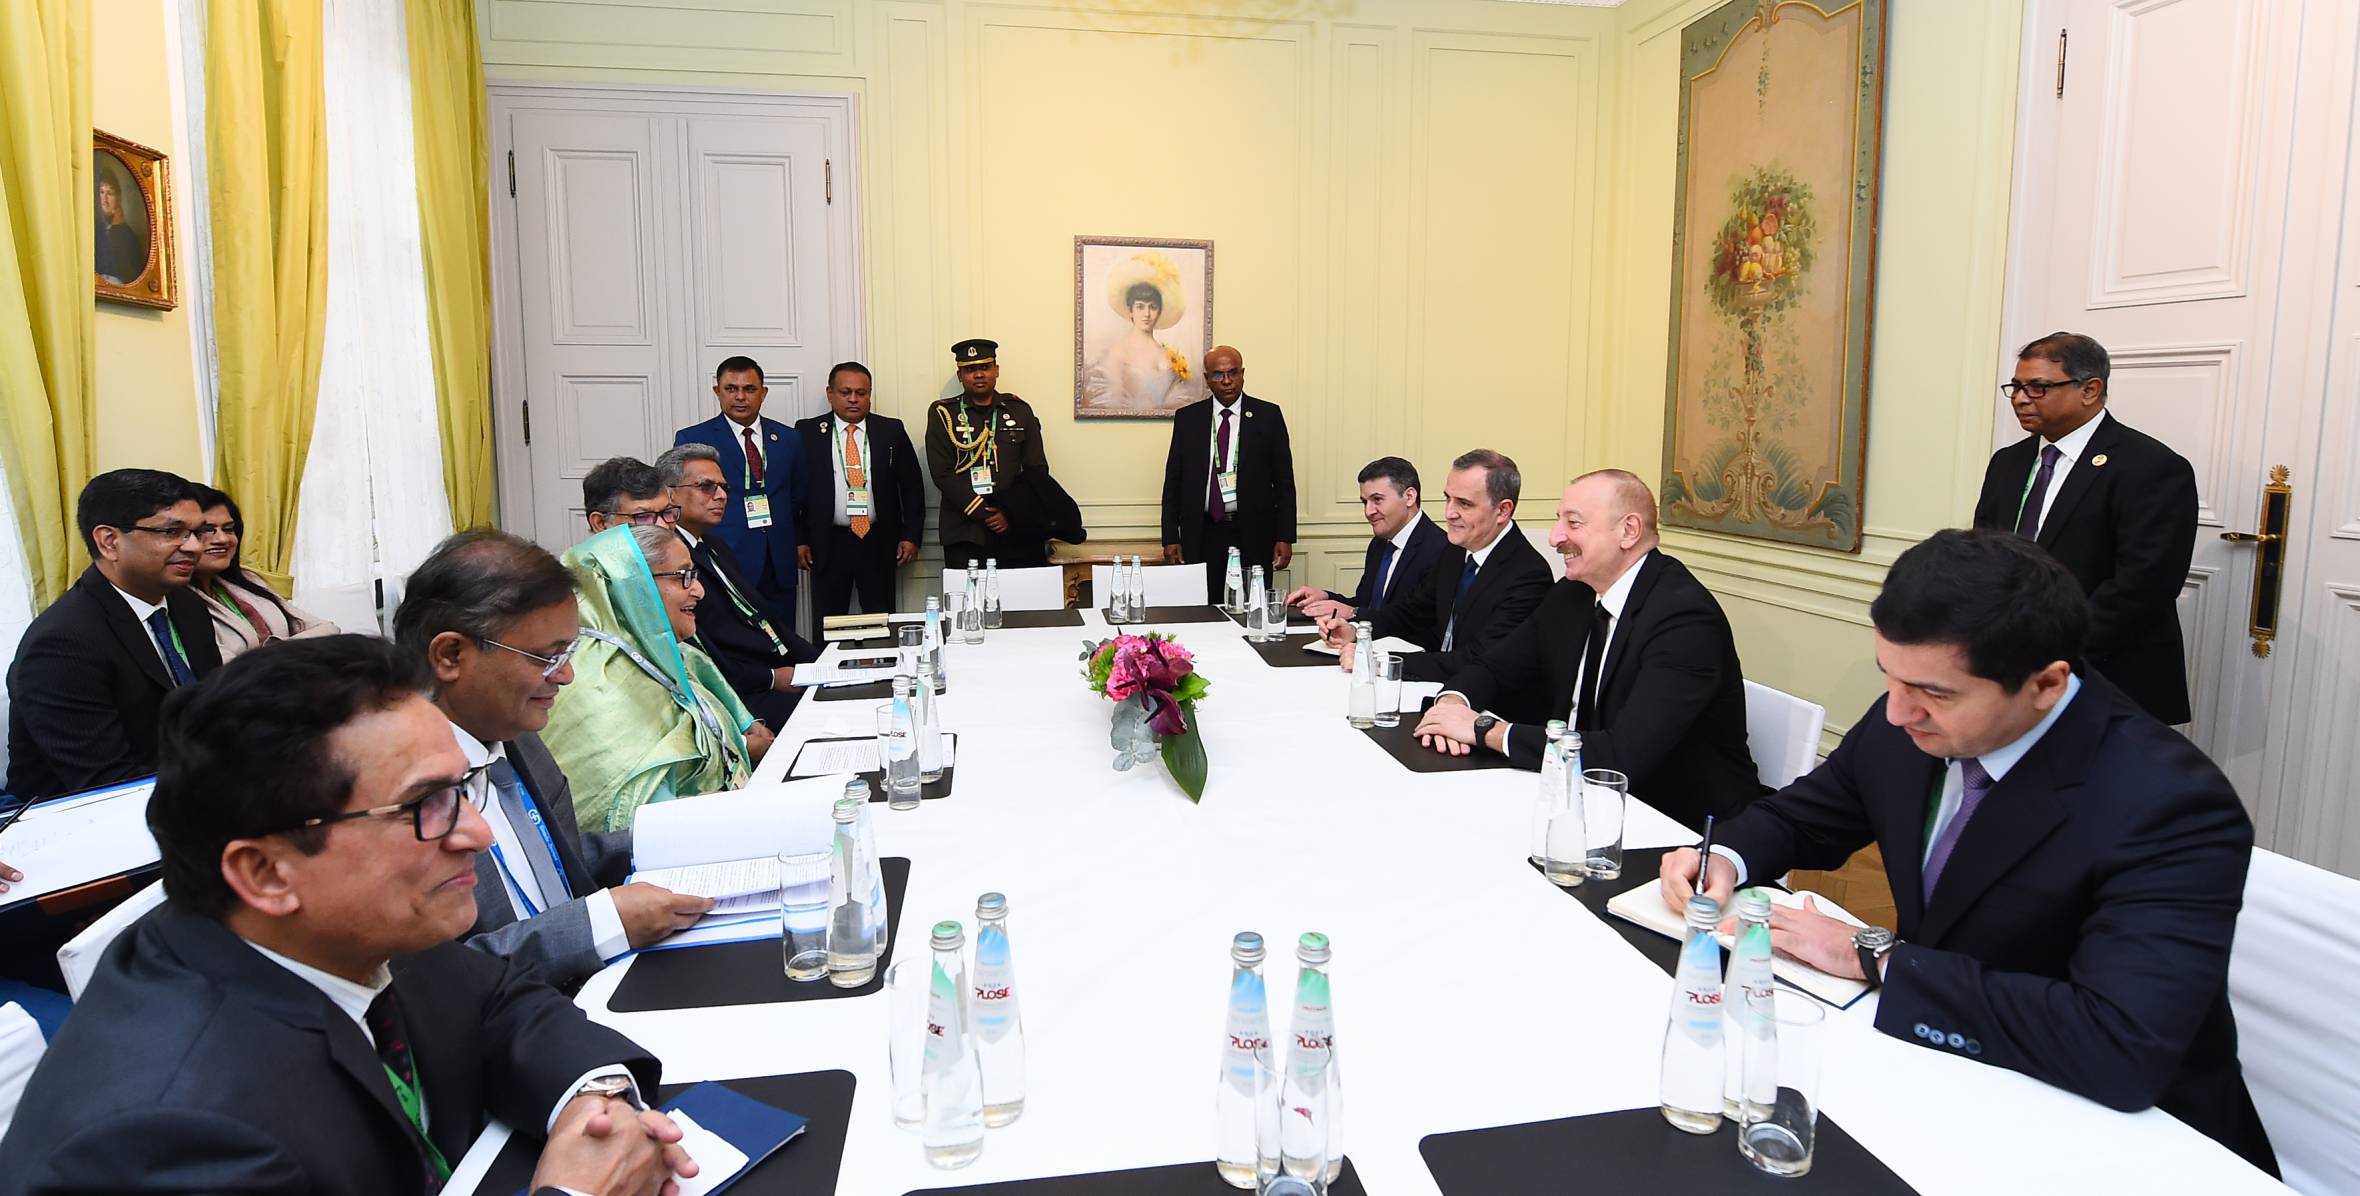 Ilham Aliyev has met with Prime Minister of the People's Republic of Bangladesh